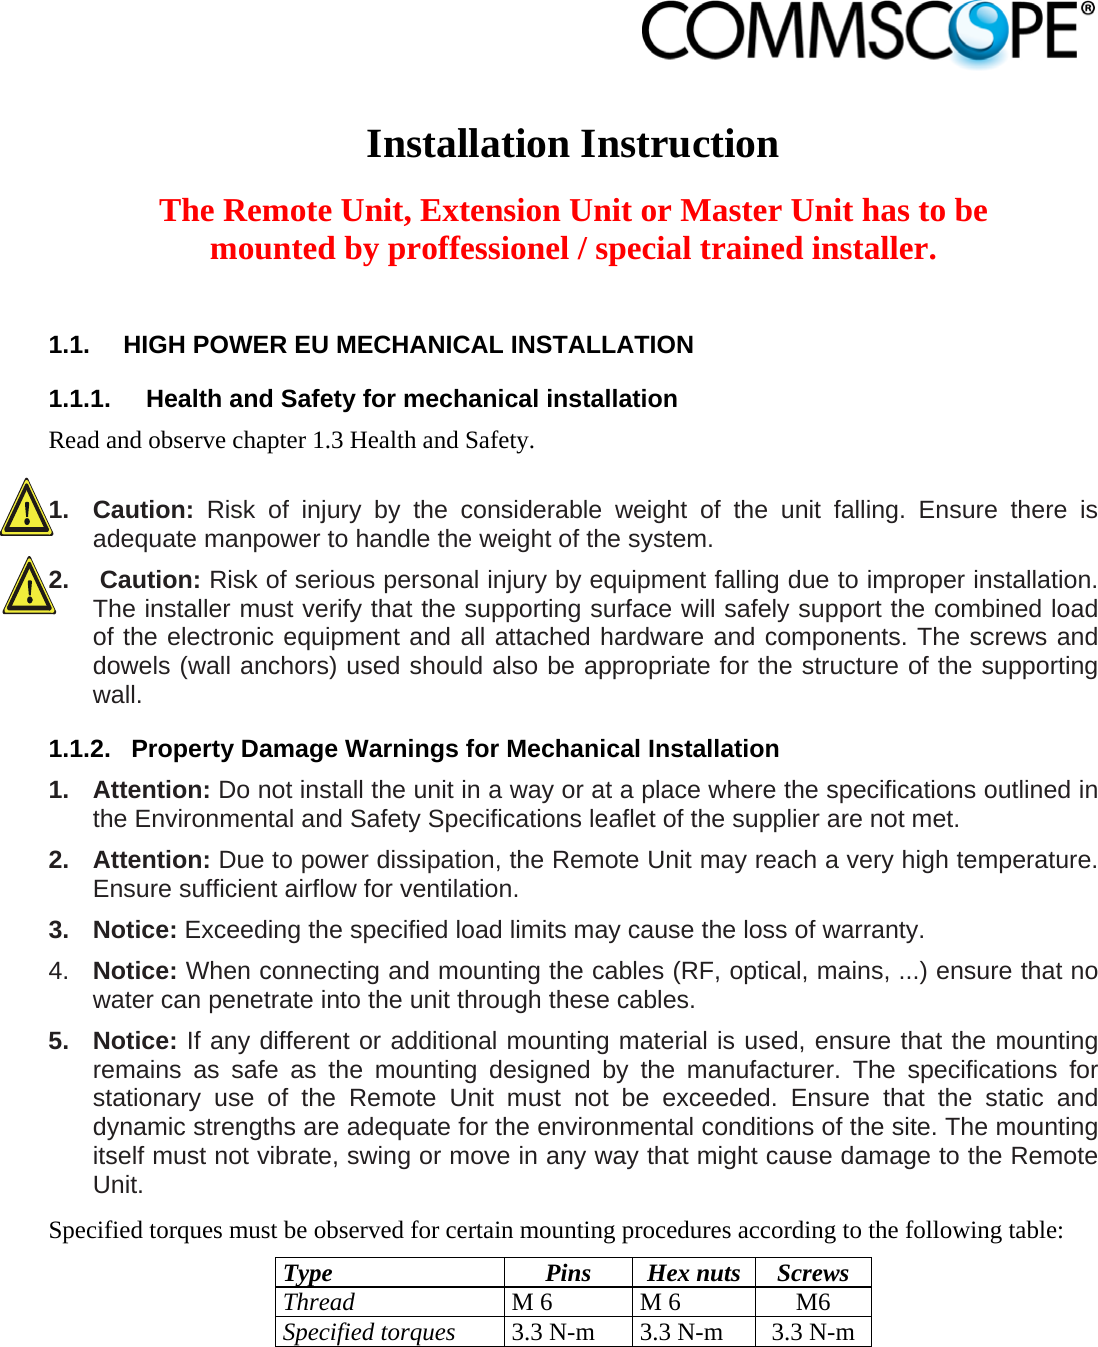                             Installation Instruction  The Remote Unit, Extension Unit or Master Unit has to be mounted by proffessionel / special trained installer.  1.1.  HIGH POWER EU MECHANICAL INSTALLATION 1.1.1.  Health and Safety for mechanical installation Read and observe chapter 1.3 Health and Safety.  1. Caution: Risk of injury by the considerable weight of the unit falling. Ensure there is adequate manpower to handle the weight of the system. 2.   Caution: Risk of serious personal injury by equipment falling due to improper installation. The installer must verify that the supporting surface will safely support the combined load of the electronic equipment and all attached hardware and components. The screws and dowels (wall anchors) used should also be appropriate for the structure of the supporting wall. 1.1.2.  Property Damage Warnings for Mechanical Installation 1. Attention: Do not install the unit in a way or at a place where the specifications outlined in the Environmental and Safety Specifications leaflet of the supplier are not met. 2. Attention: Due to power dissipation, the Remote Unit may reach a very high temperature. Ensure sufficient airflow for ventilation. 3. Notice: Exceeding the specified load limits may cause the loss of warranty. 4.  Notice: When connecting and mounting the cables (RF, optical, mains, ...) ensure that no water can penetrate into the unit through these cables. 5. Notice: If any different or additional mounting material is used, ensure that the mounting remains as safe as the mounting designed by the manufacturer. The specifications for stationary use of the Remote Unit must not be exceeded. Ensure that the static and dynamic strengths are adequate for the environmental conditions of the site. The mounting itself must not vibrate, swing or move in any way that might cause damage to the Remote Unit. Specified torques must be observed for certain mounting procedures according to the following table: Type Pins Hex nuts Screws Thread M 6  M 6  M6 Specified torques 3.3 N-m  3.3 N-m  3.3 N-m  